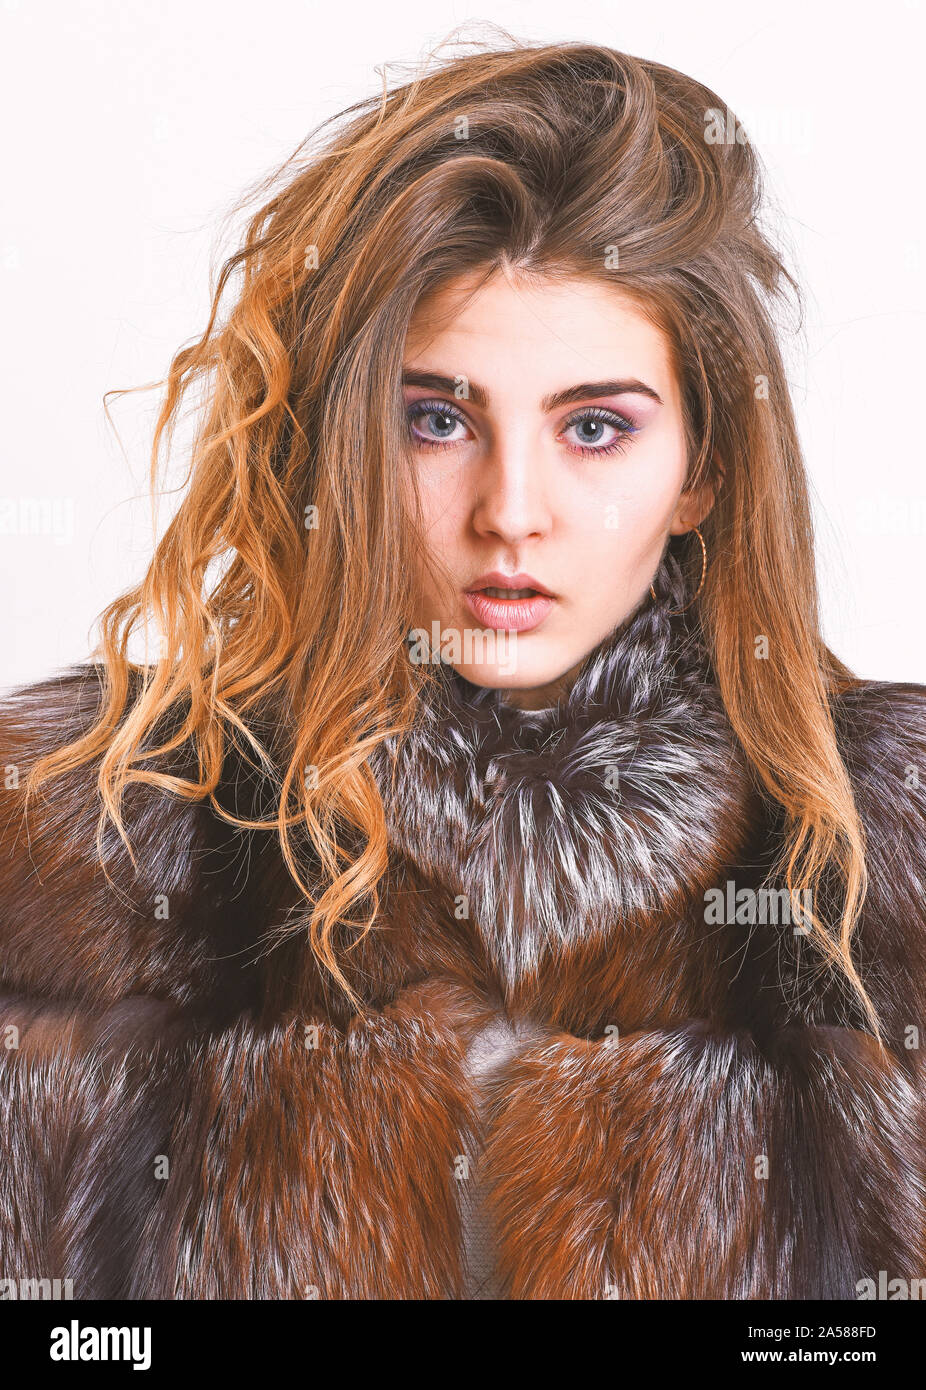 Winter hair care tips you should follow. Hair care concept. Girl fur coat  posing with hairstyle on white background close up. Prevent winter hair  damage. Woman makeup calm face hair volume hairstyle